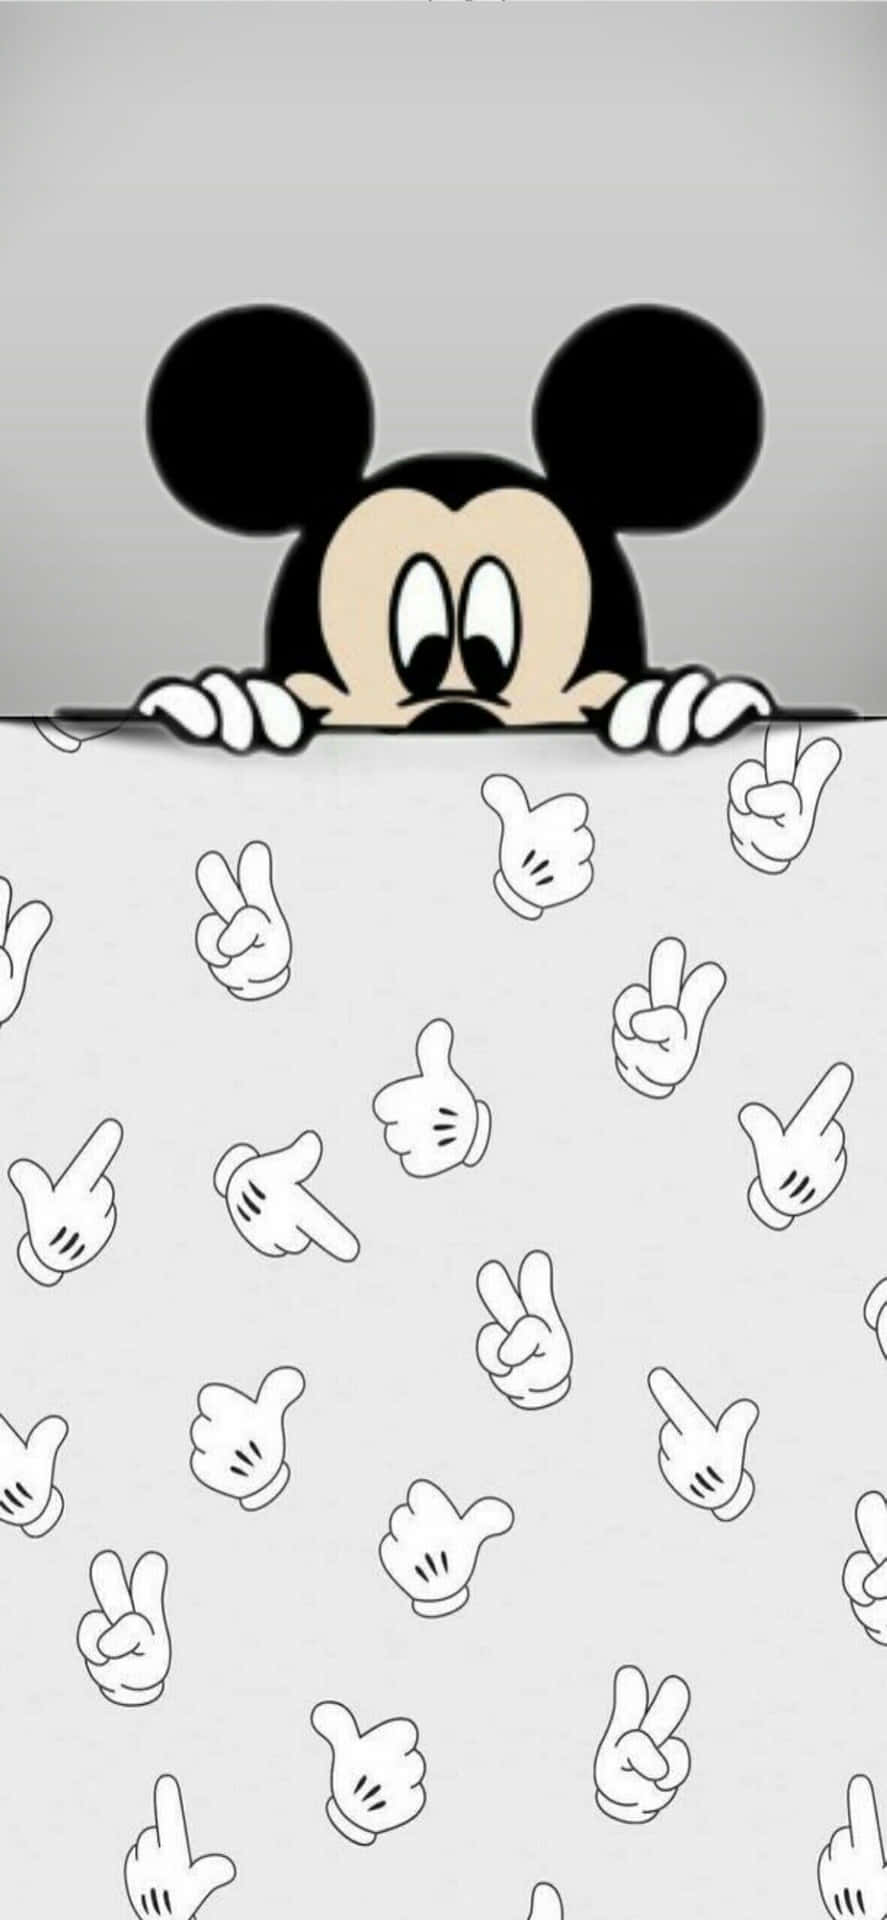 Download Image Black Mickey Mouse Phone Wallpaper | Wallpapers.com